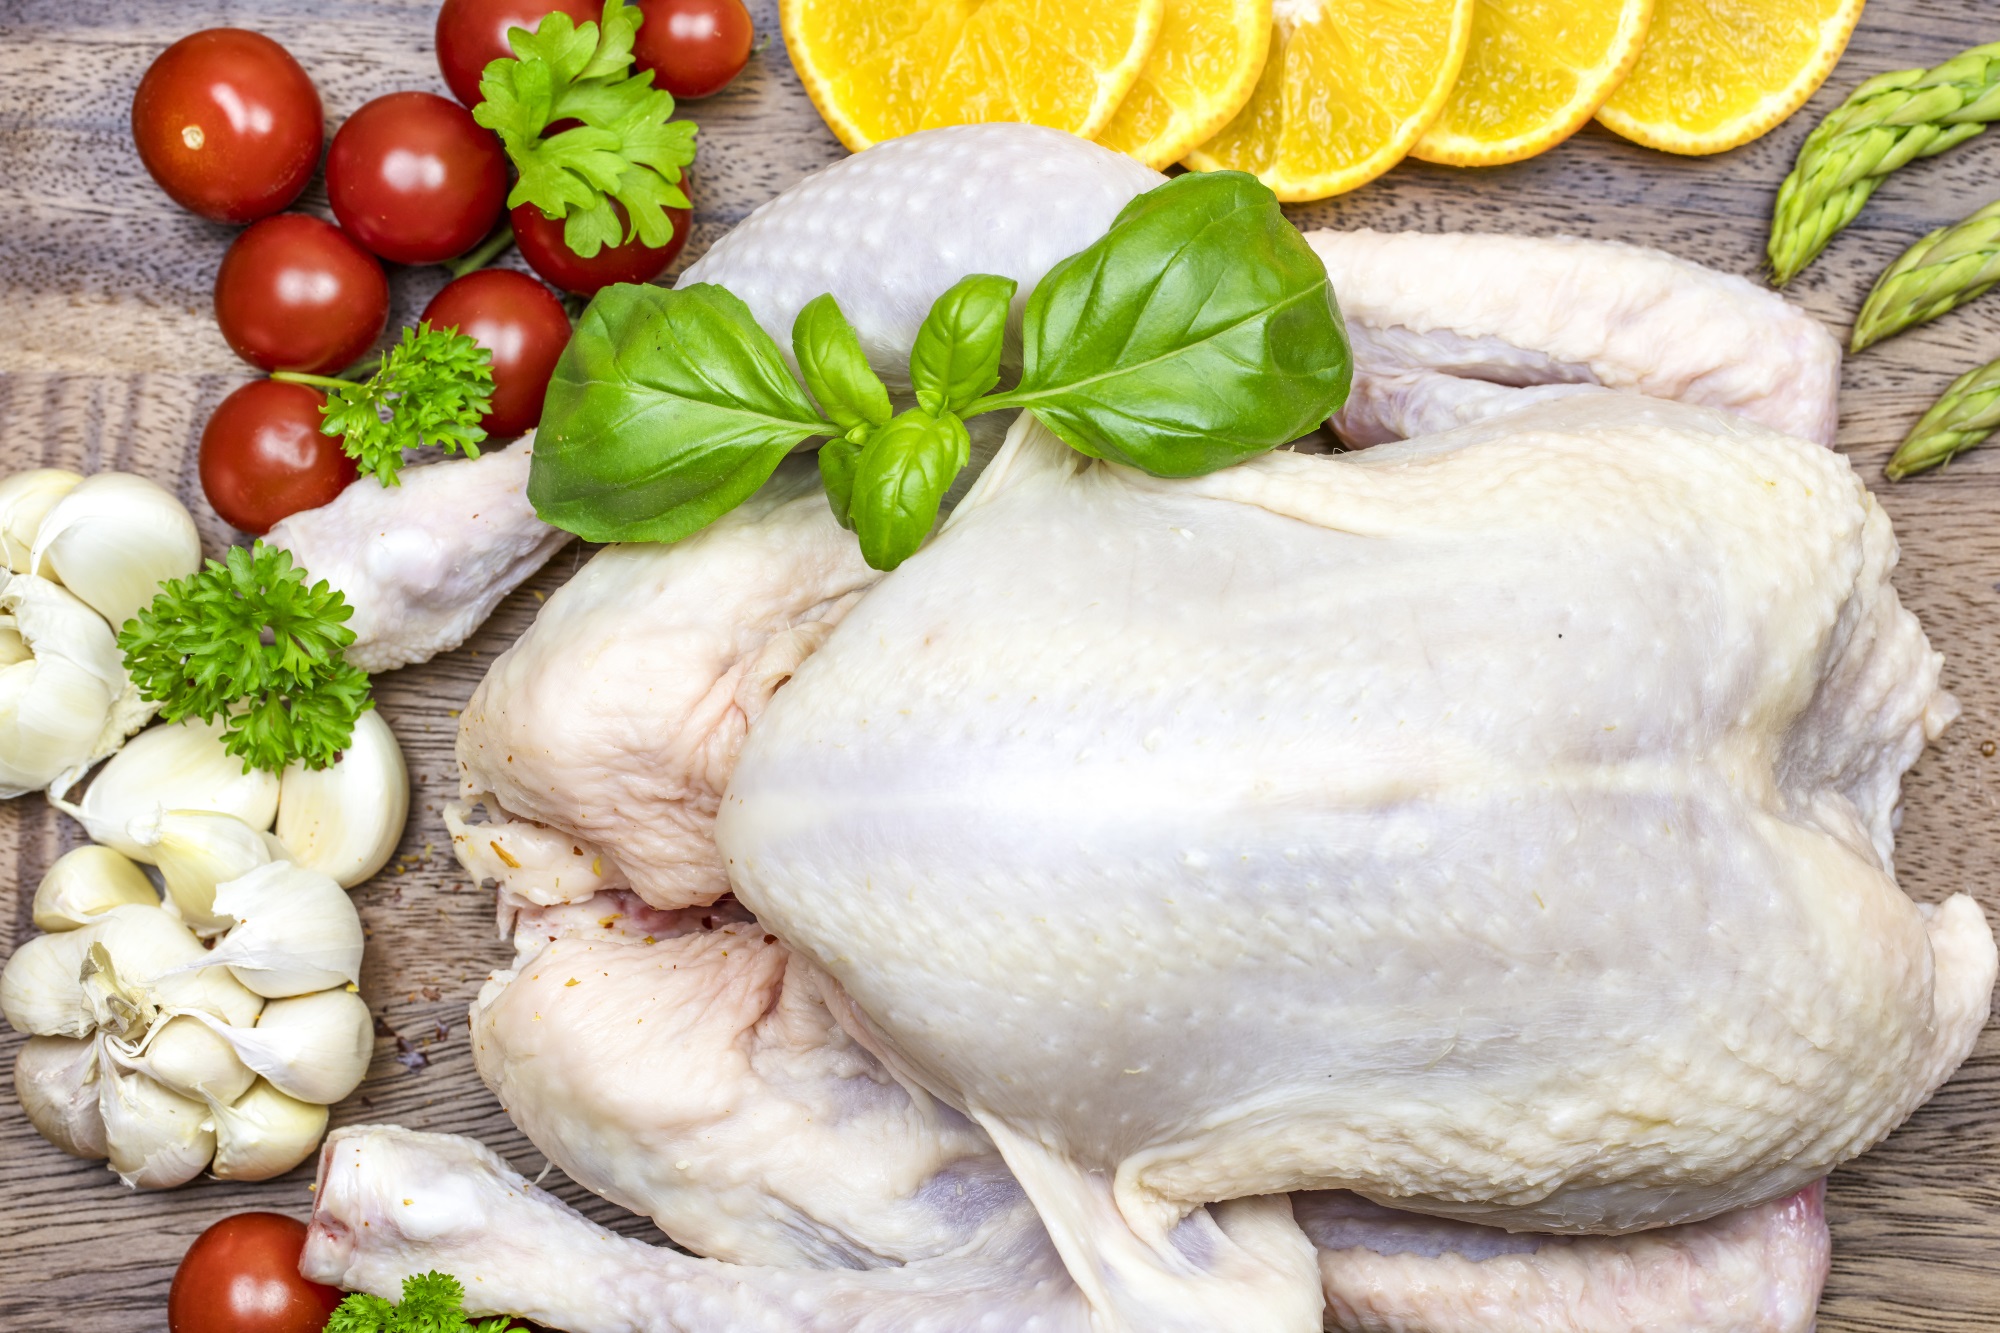 Researchers found people did not know the risks associated with fresh chicken and said retailers...